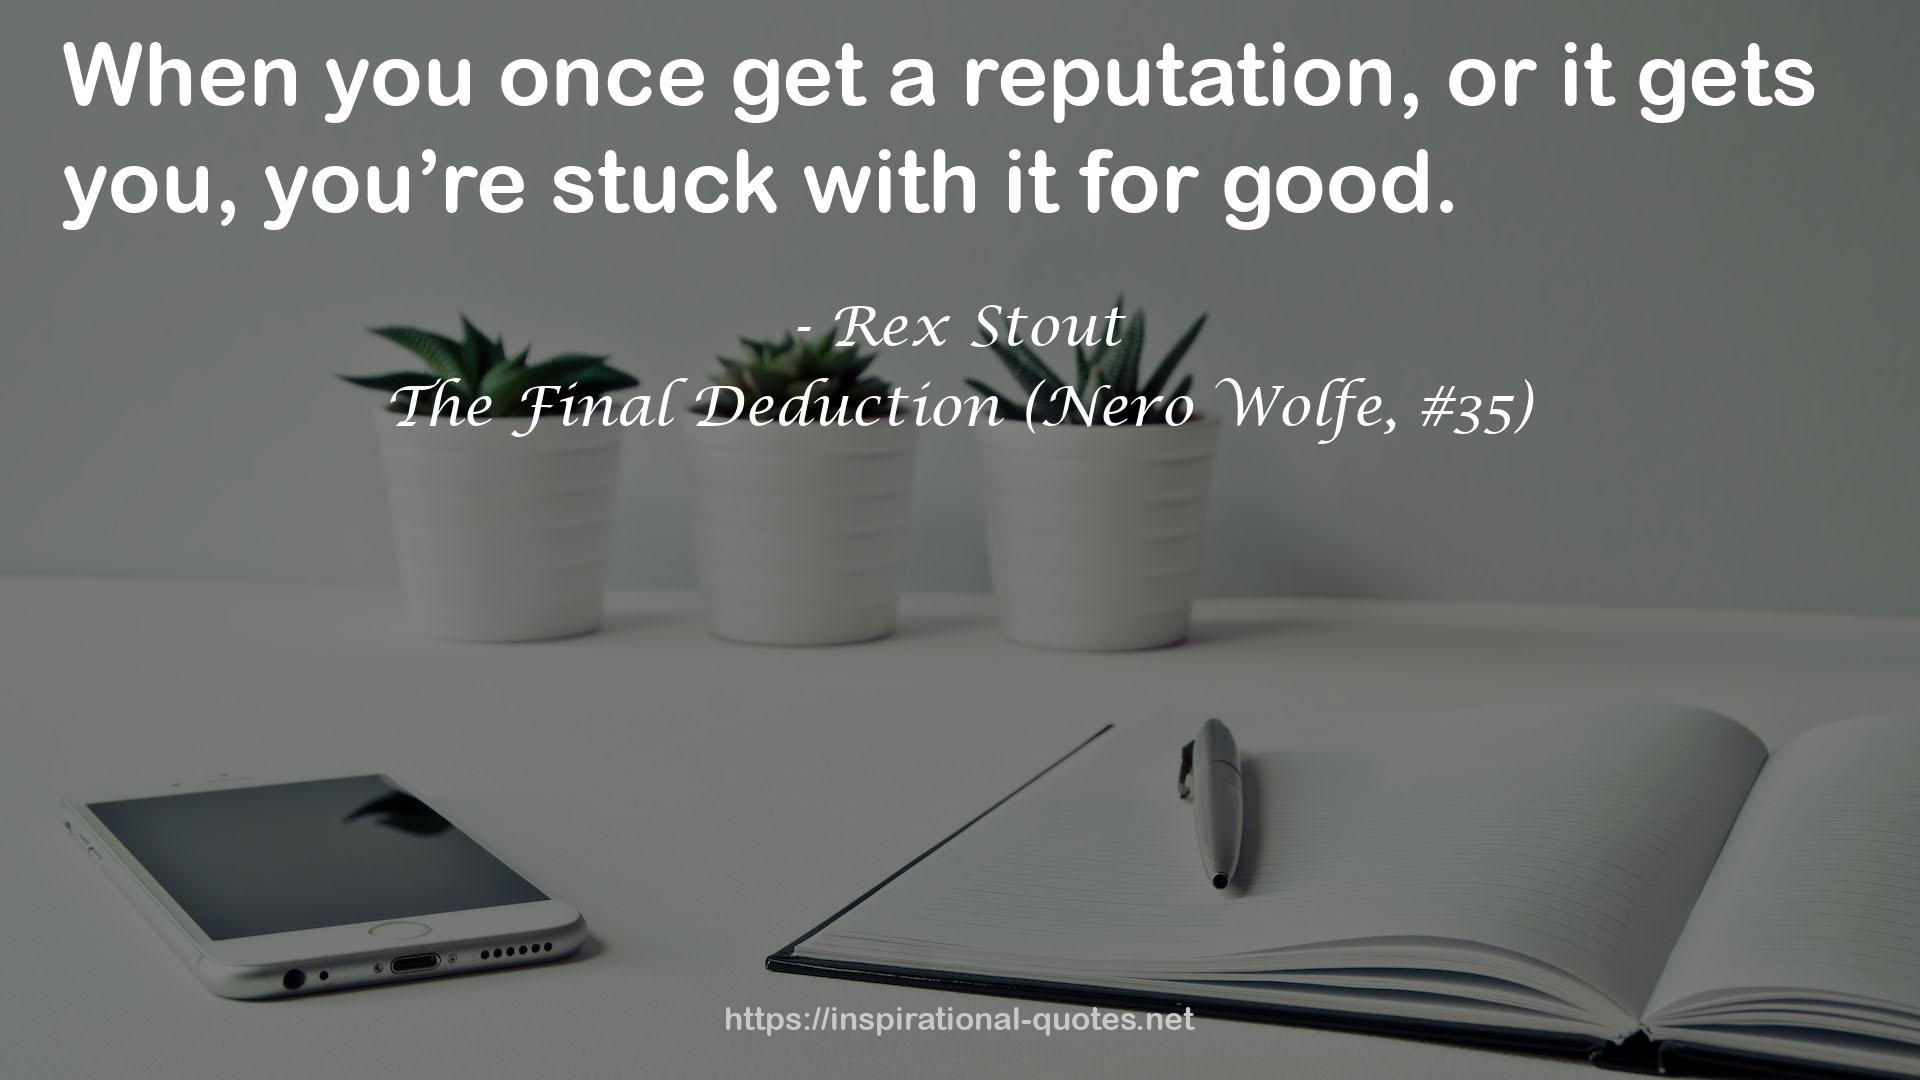 The Final Deduction (Nero Wolfe, #35) QUOTES